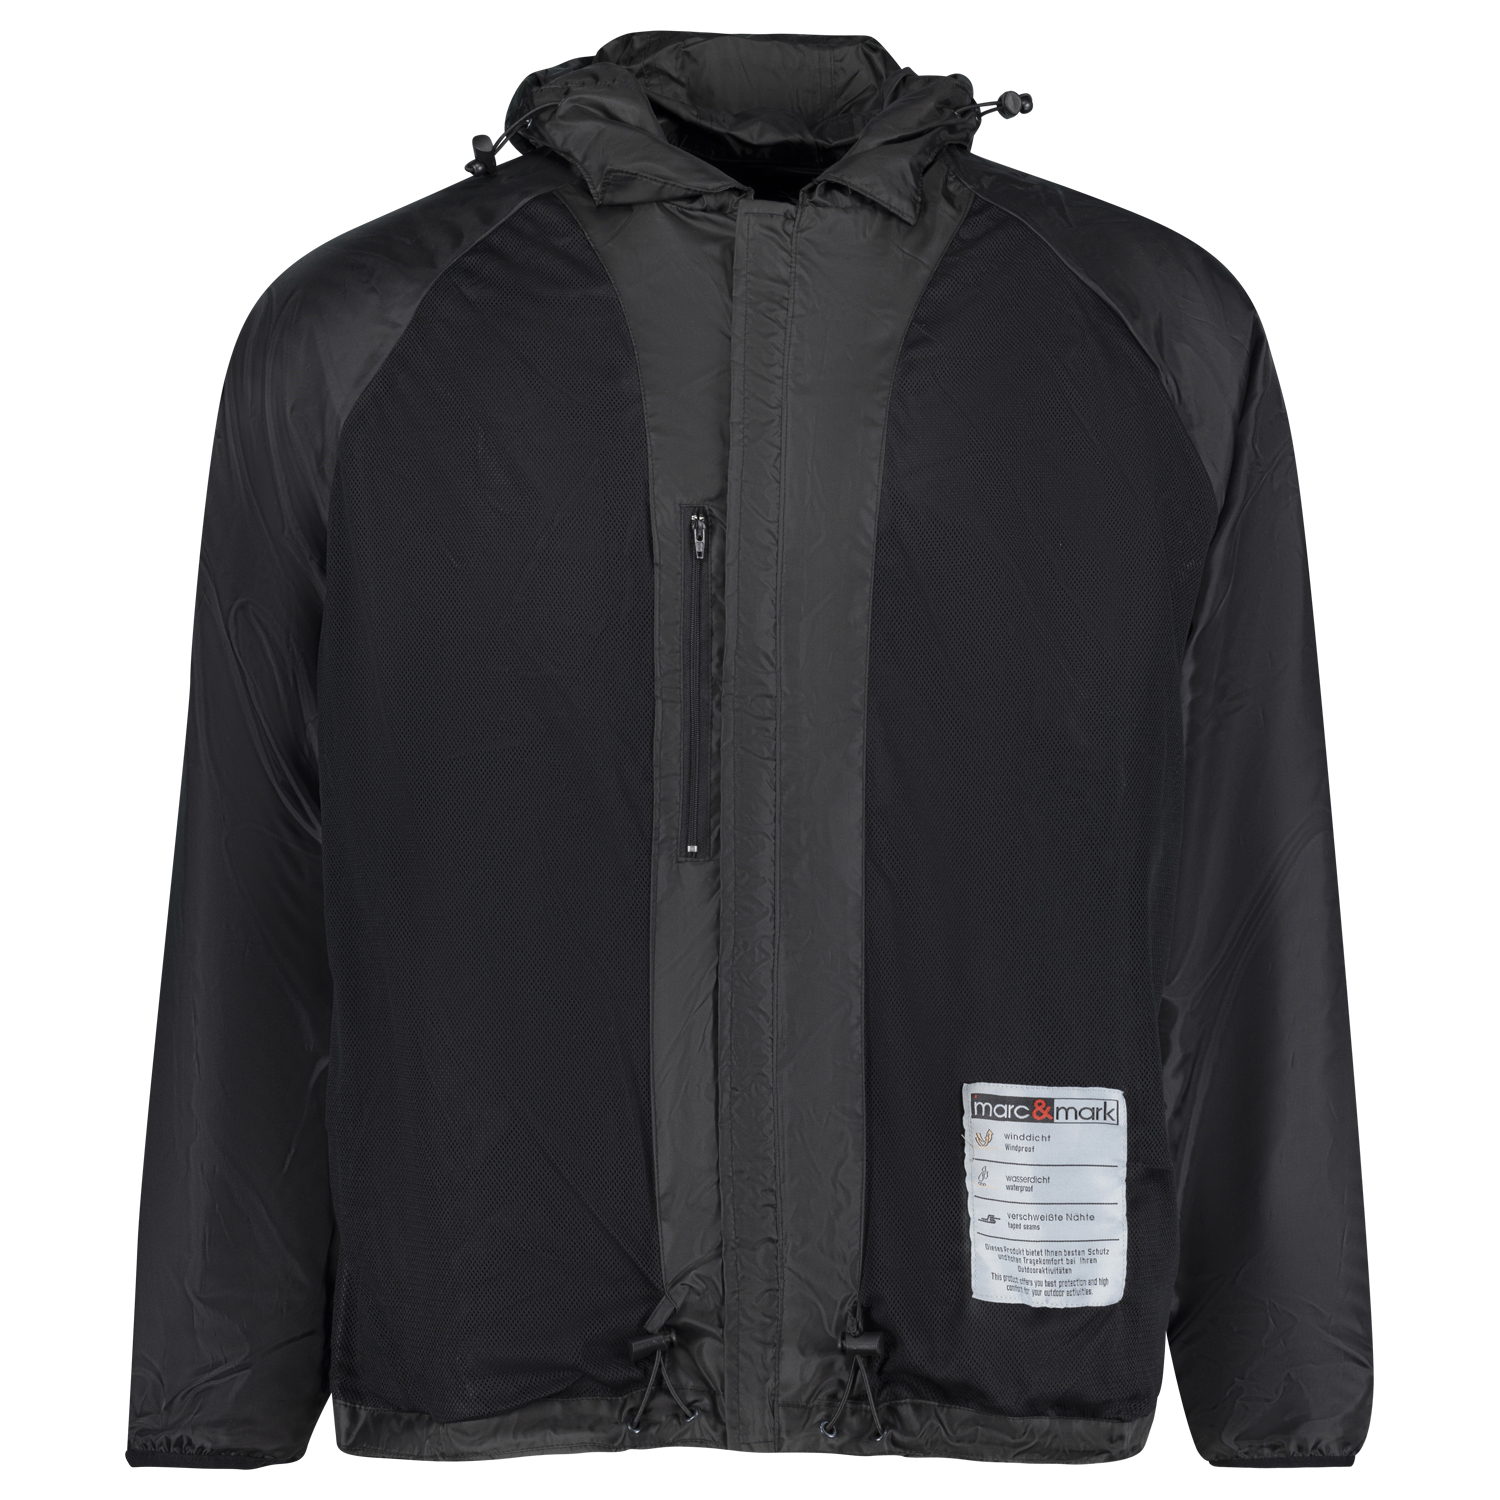 Black wind and rain jacket from marc&mark in plus sizes up to 12XL